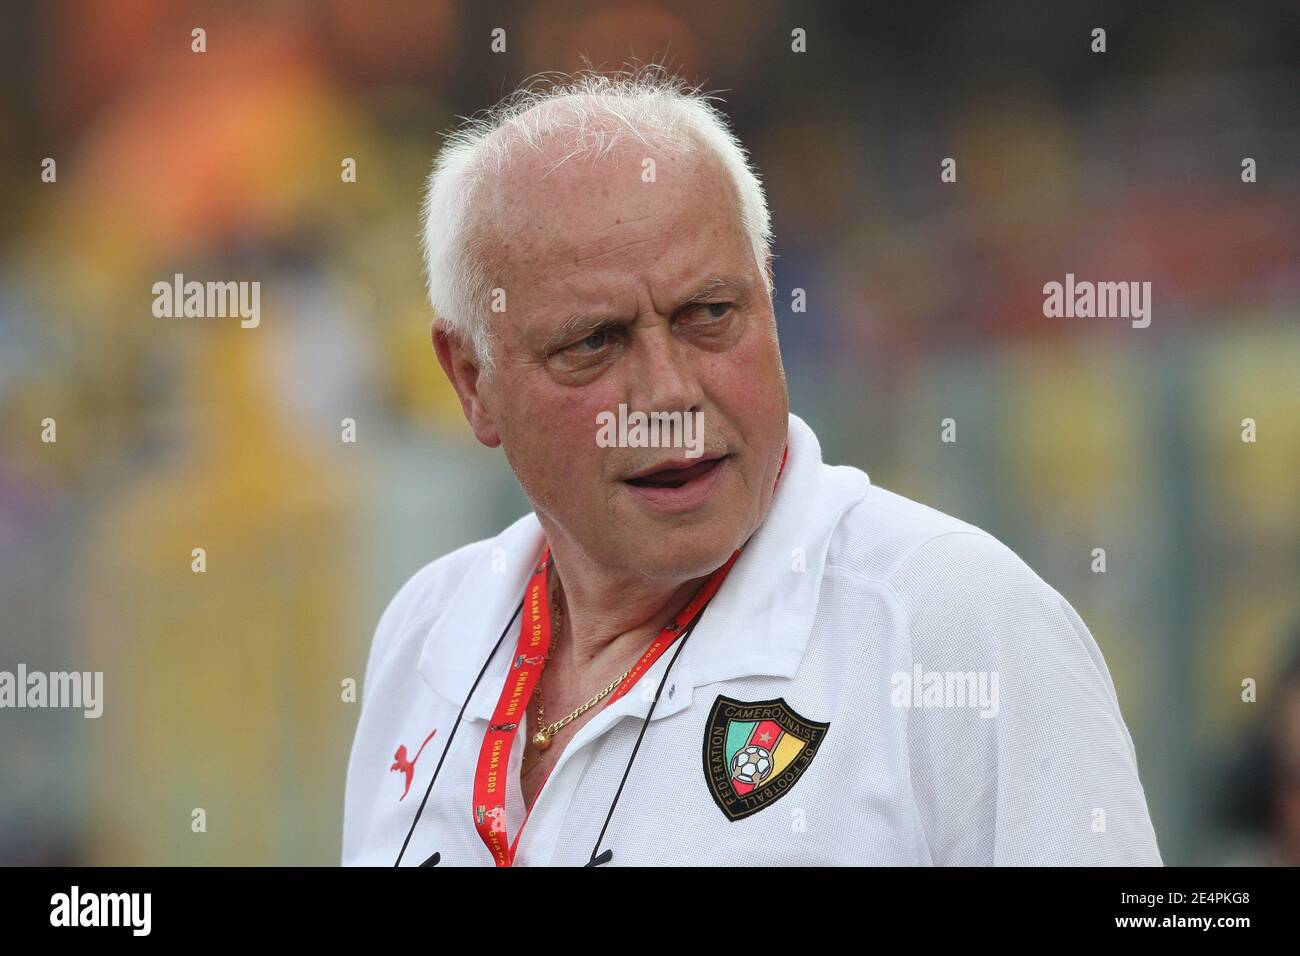 Cameroon's coach Otto Pfister during the Final of the 2008 African Cup of Nations soccer tournament, Cameroon vs Egypt in Accra, Ghana on February 10, 2008. Egypt won the match 1-0. Photo by Steeve McMay/Cameleon/ABACAPRESS.COM Stock Photo